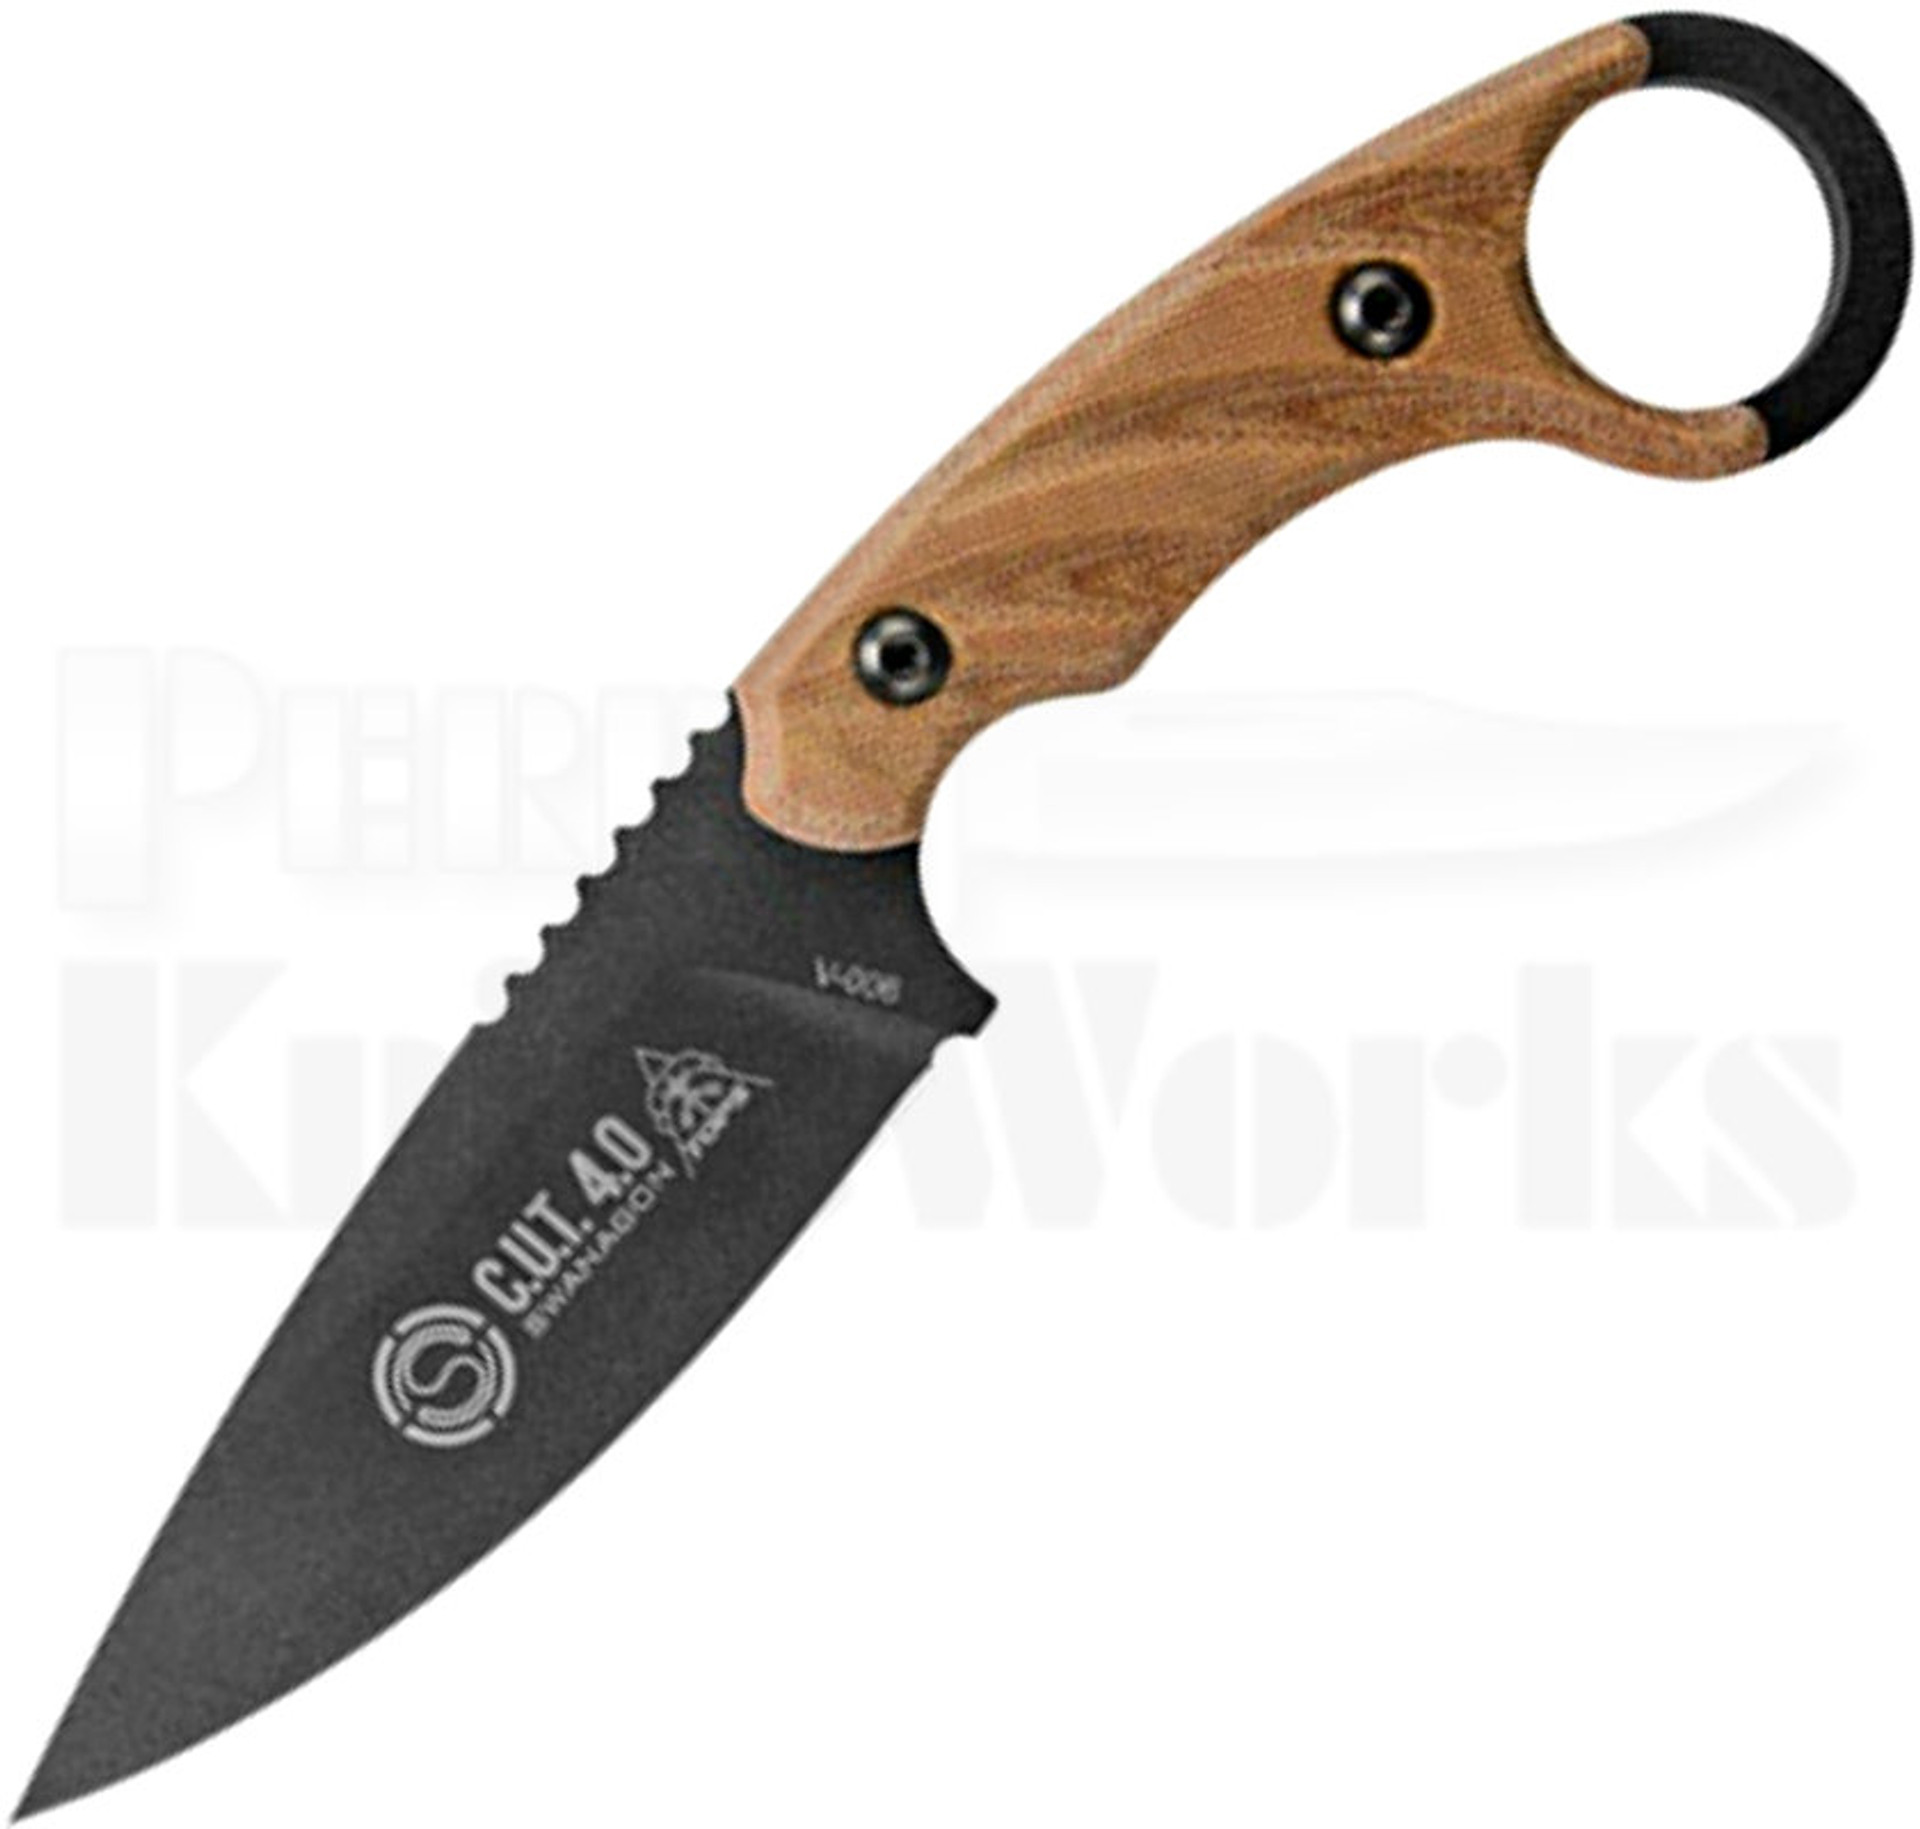 TOPS Knives C.U.T. 4.0 Combat Utility Tool - Perry Knife Works